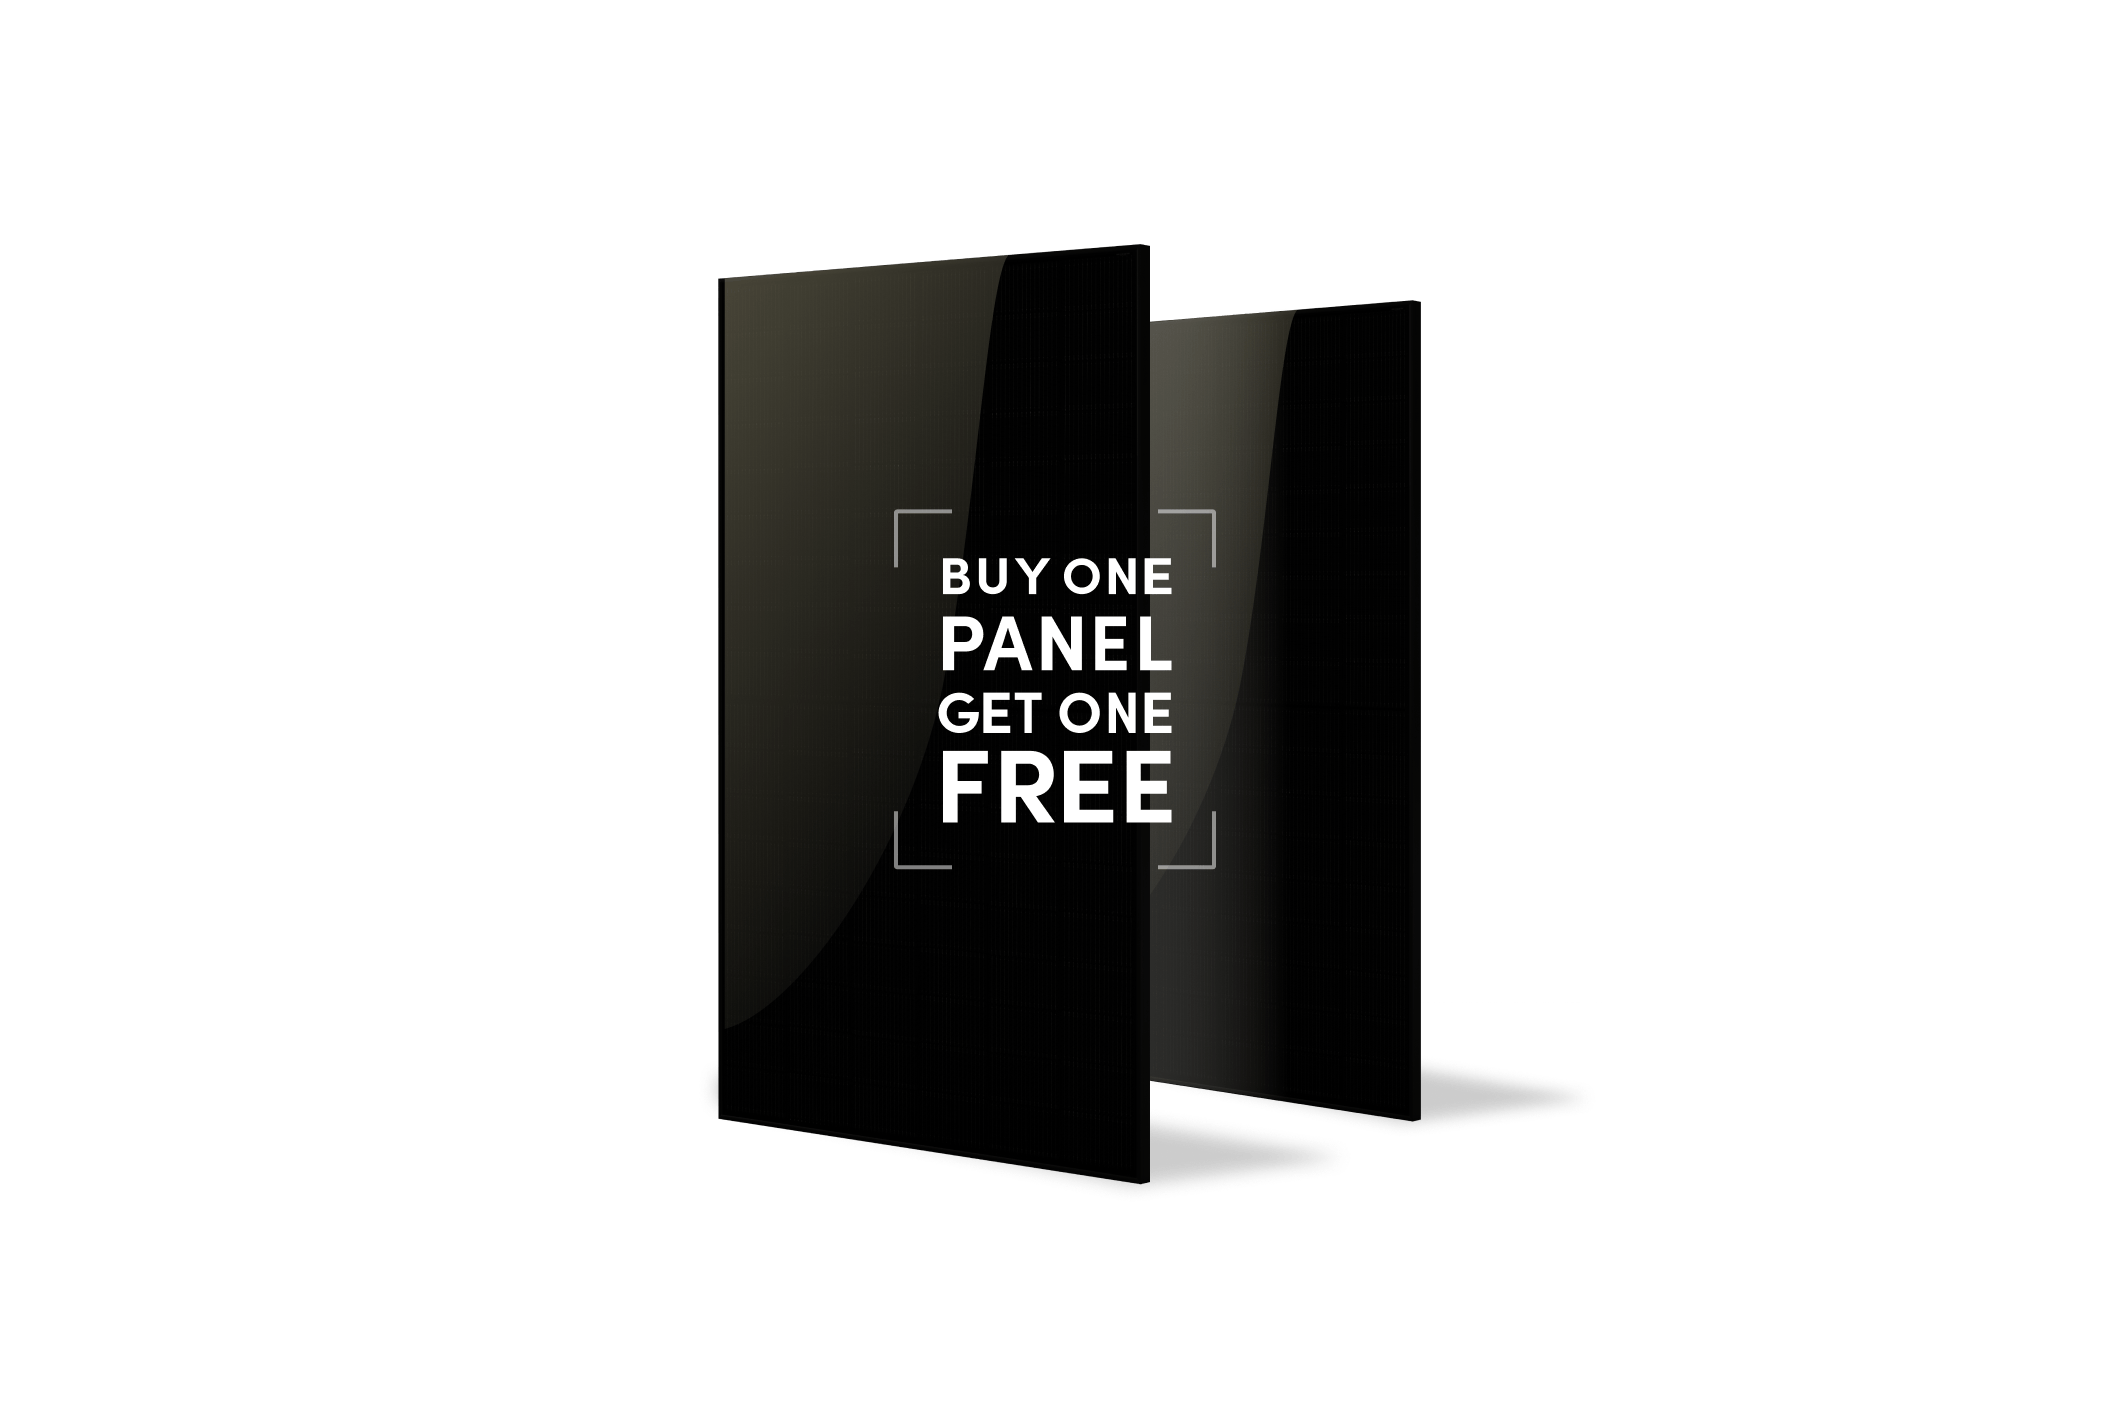 Buy one panel get one free promotion